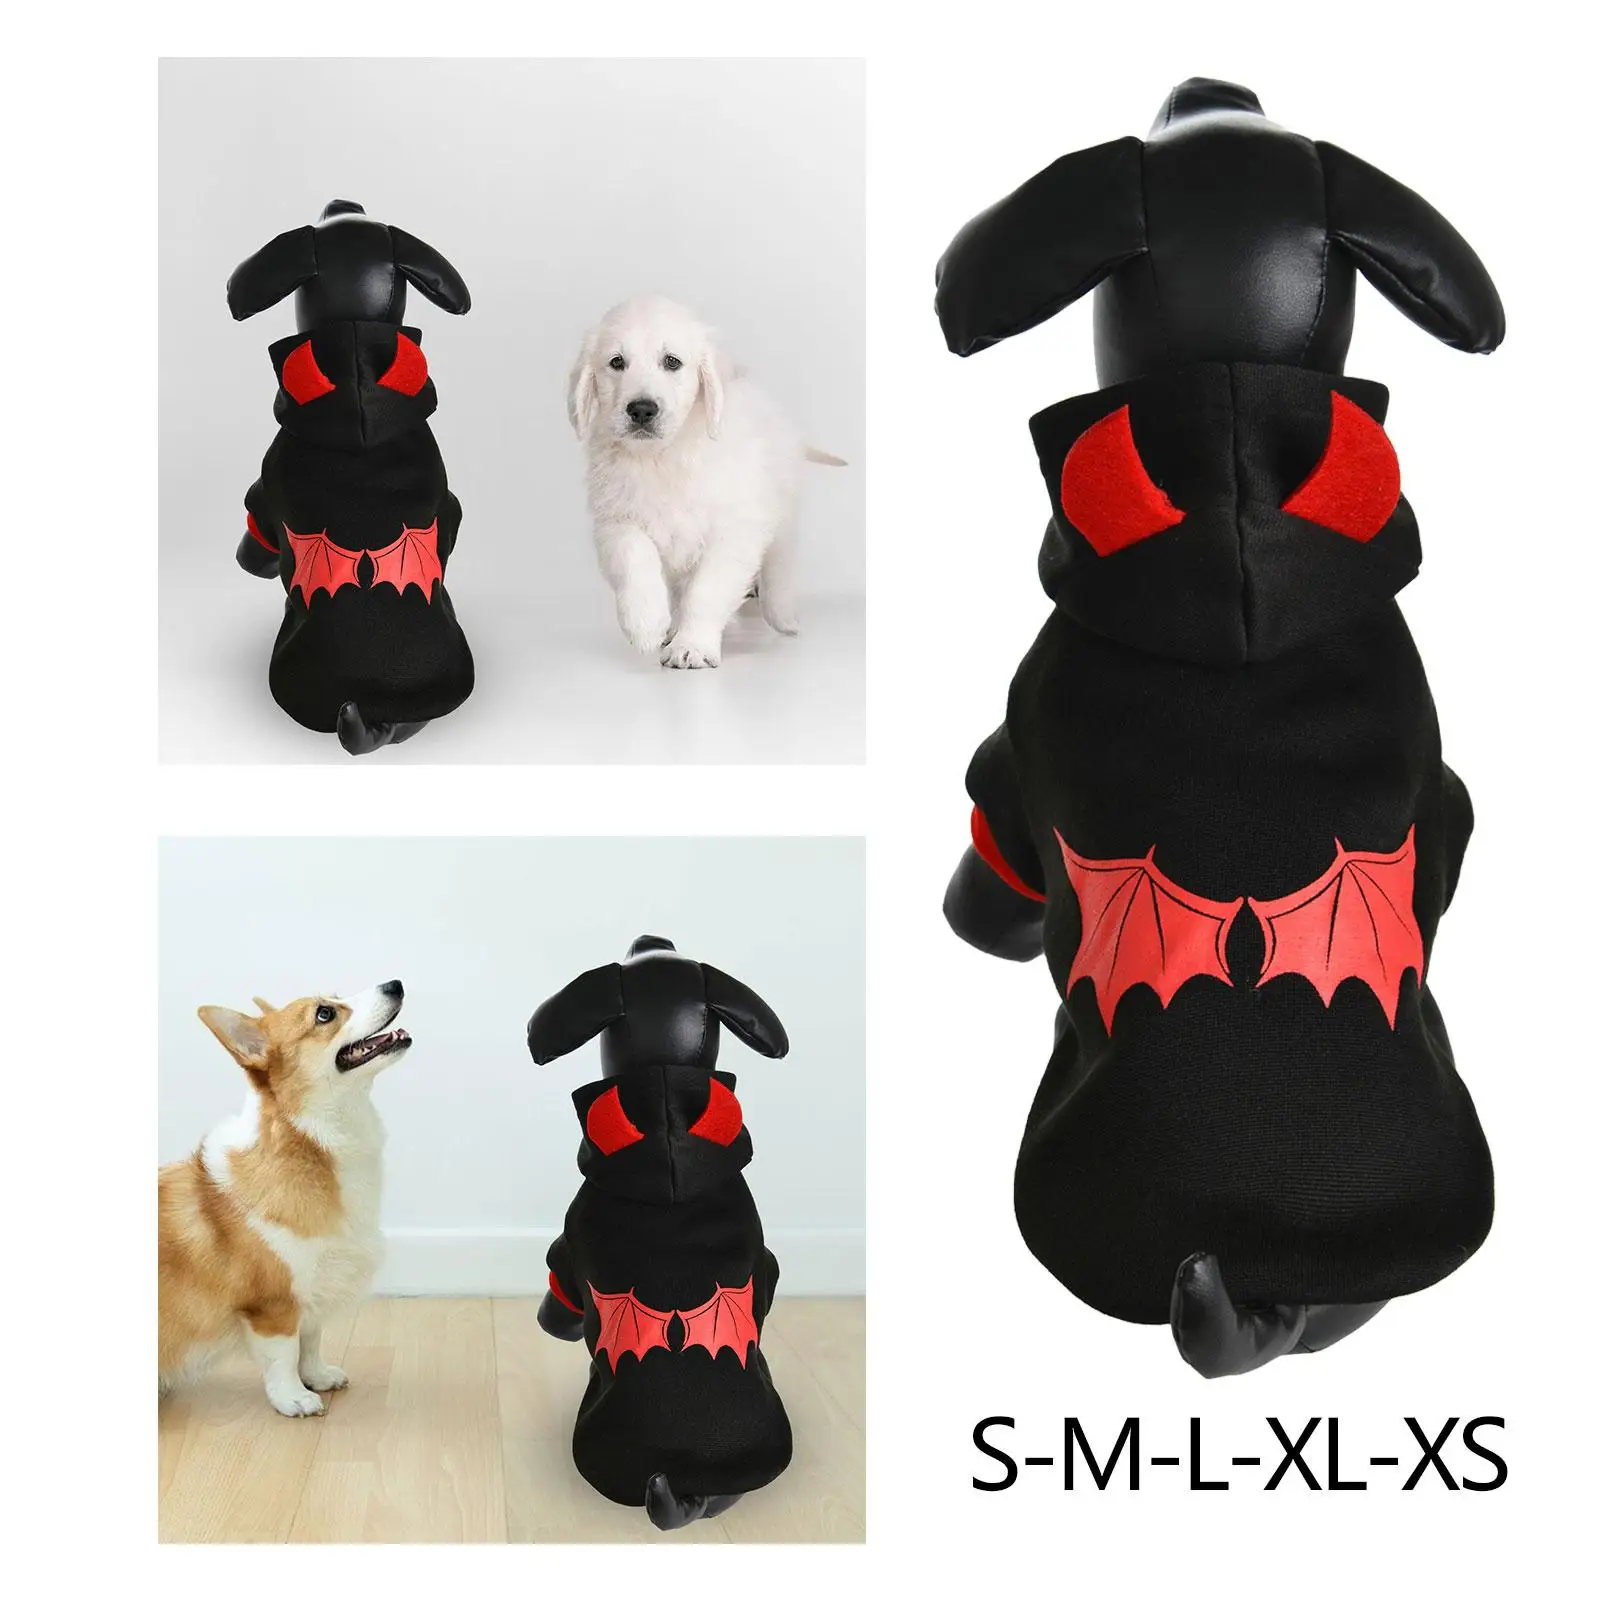 Dog Halloween Costume Bodysuit Dog Winter Warm Hoodie for Party Supplies Holiday Medium Large Dogs Cats Cosplay Decoration